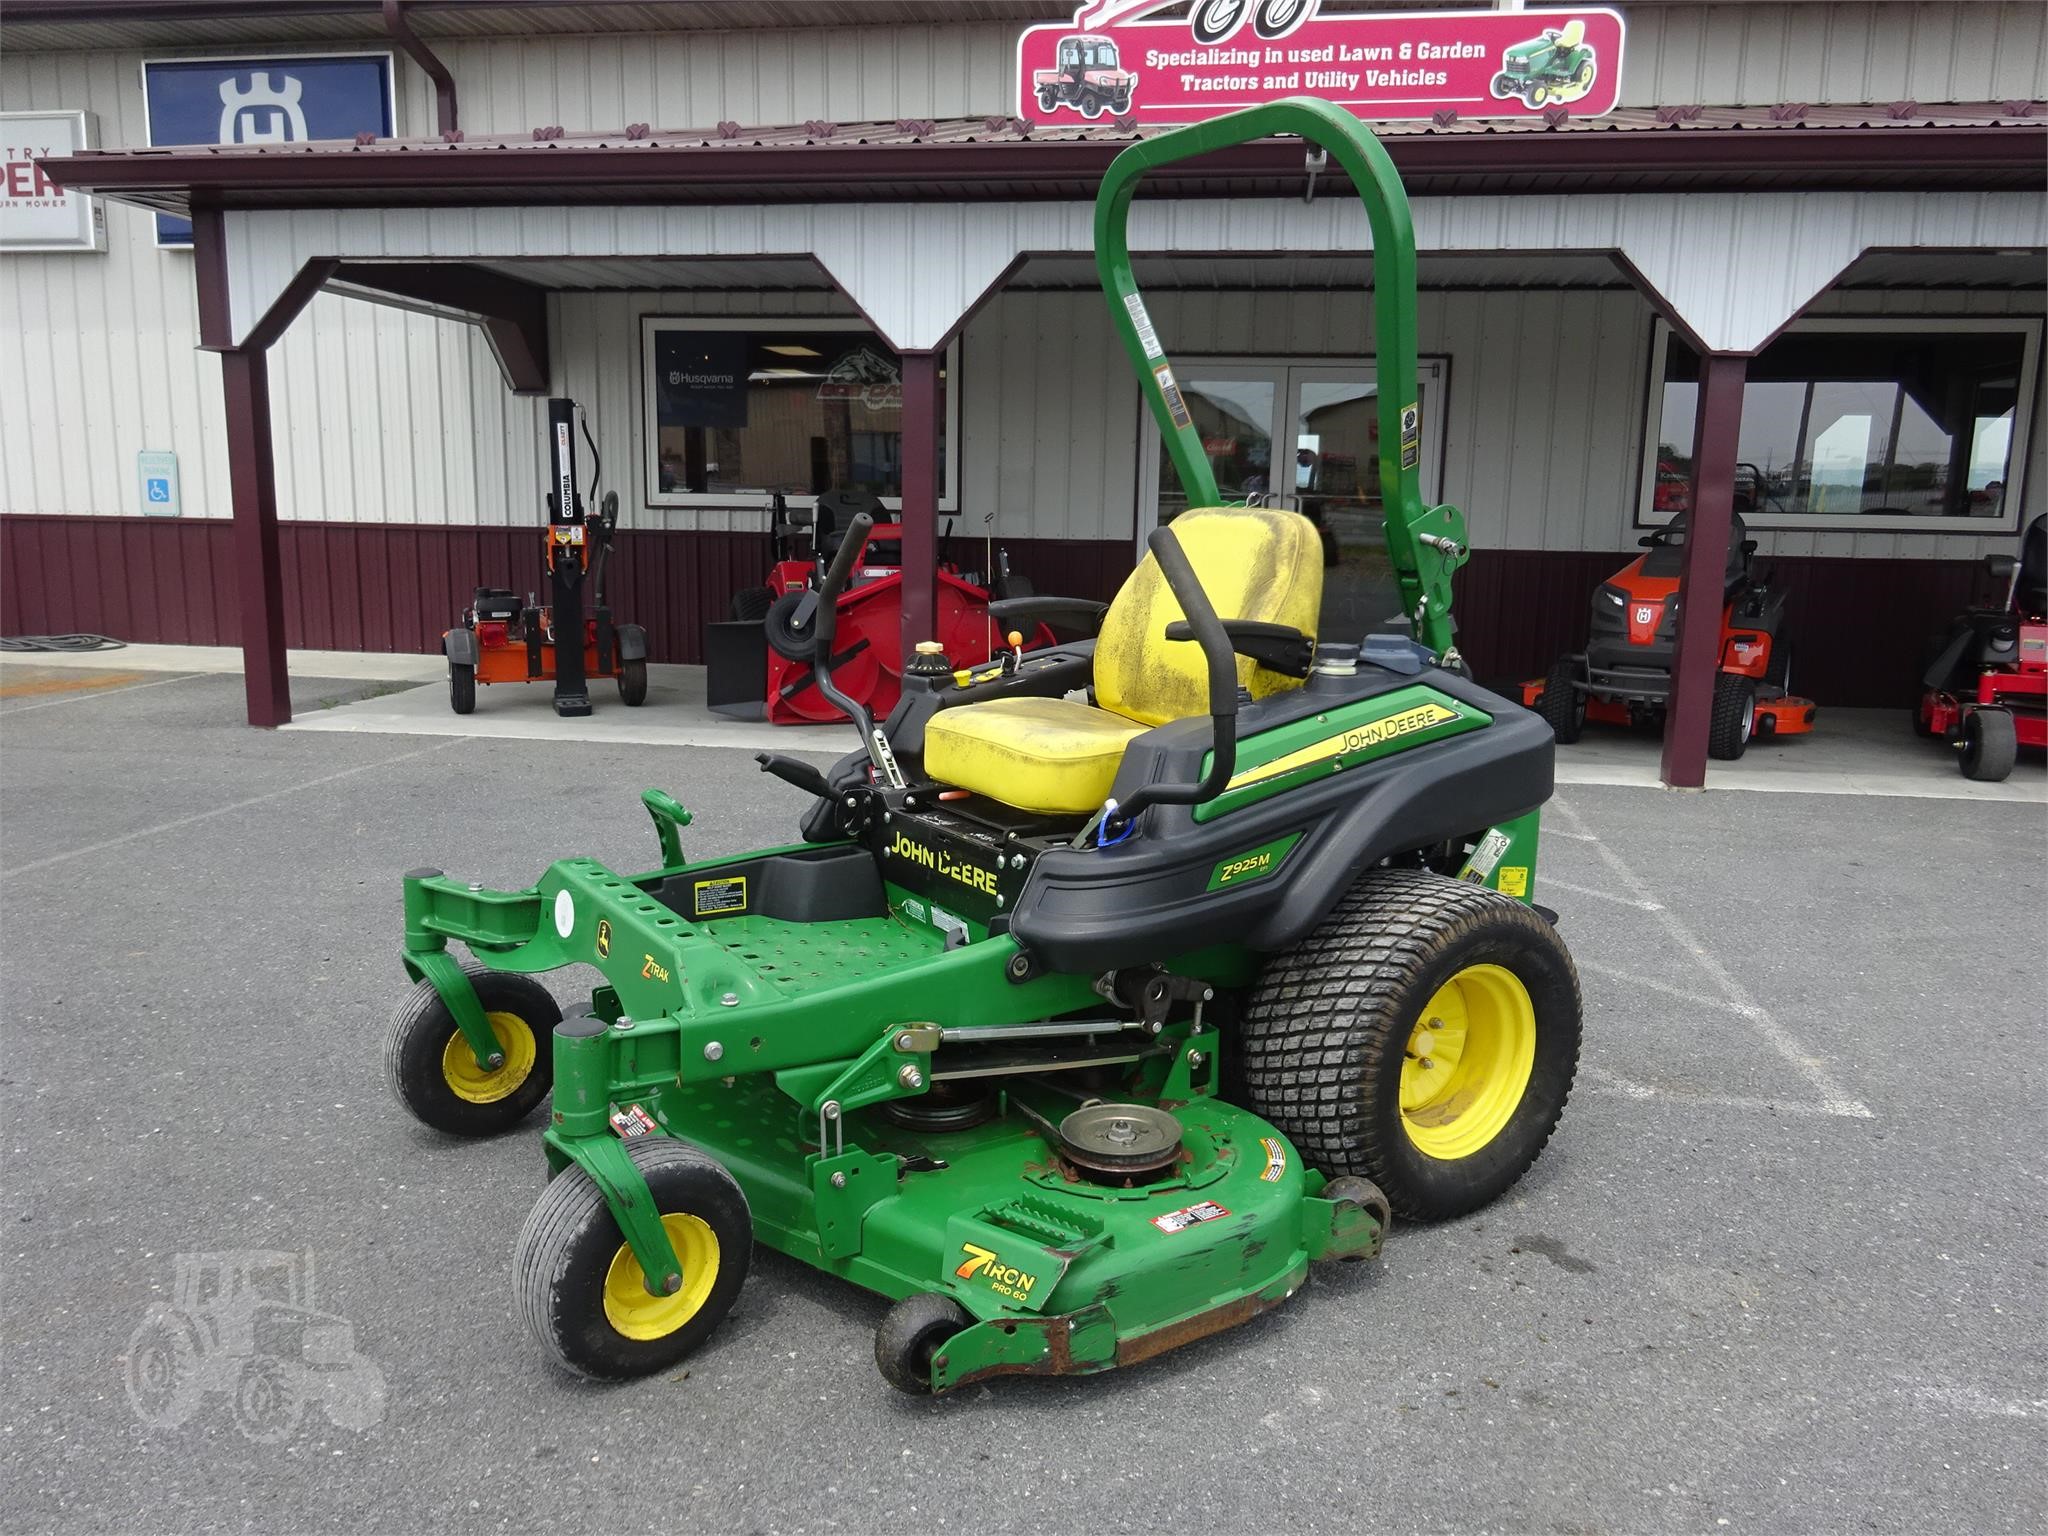 John Deere Zero Turn Lawn Mowers For Sale In Shippensburg Pennsylvania 36 Listings Tractorhouse Com Page 1 Of 2